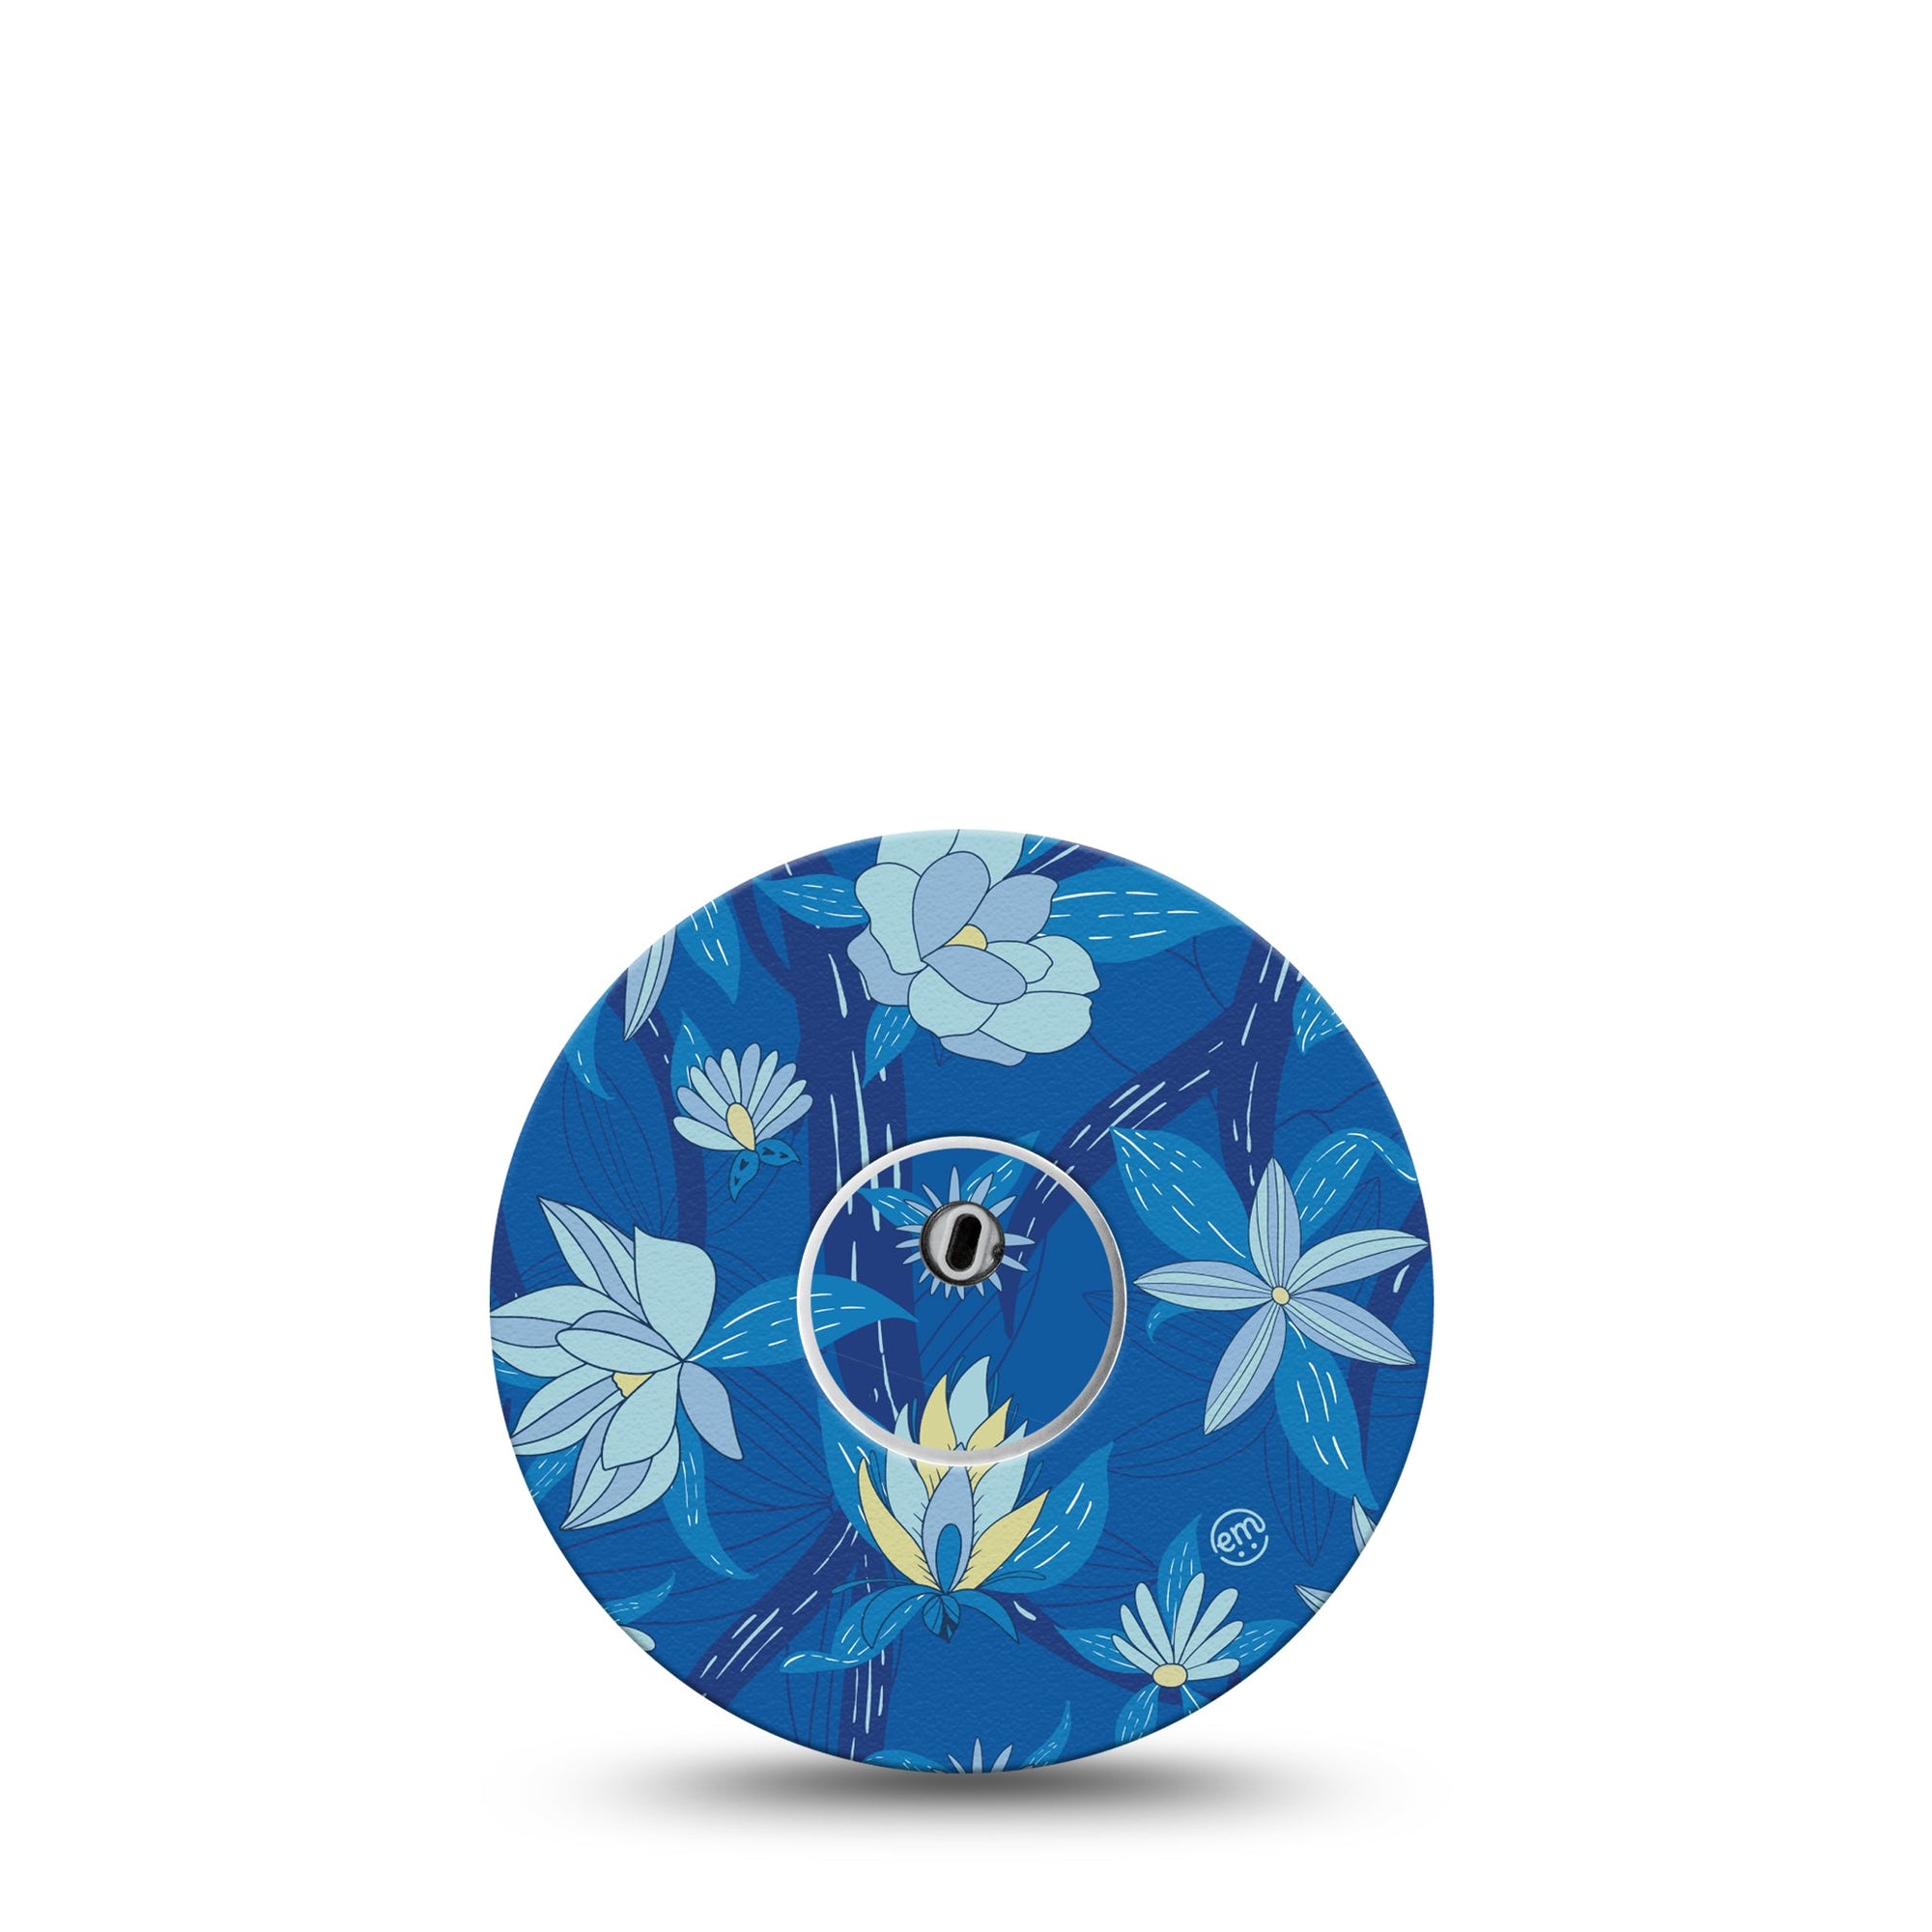 ExpressionMed Bold Blue Flowers Freestyle Libre 3 Transmitter Sticker and Tape, Bold Blossoms, CGM Vinyl Tape and Sticker Pairing